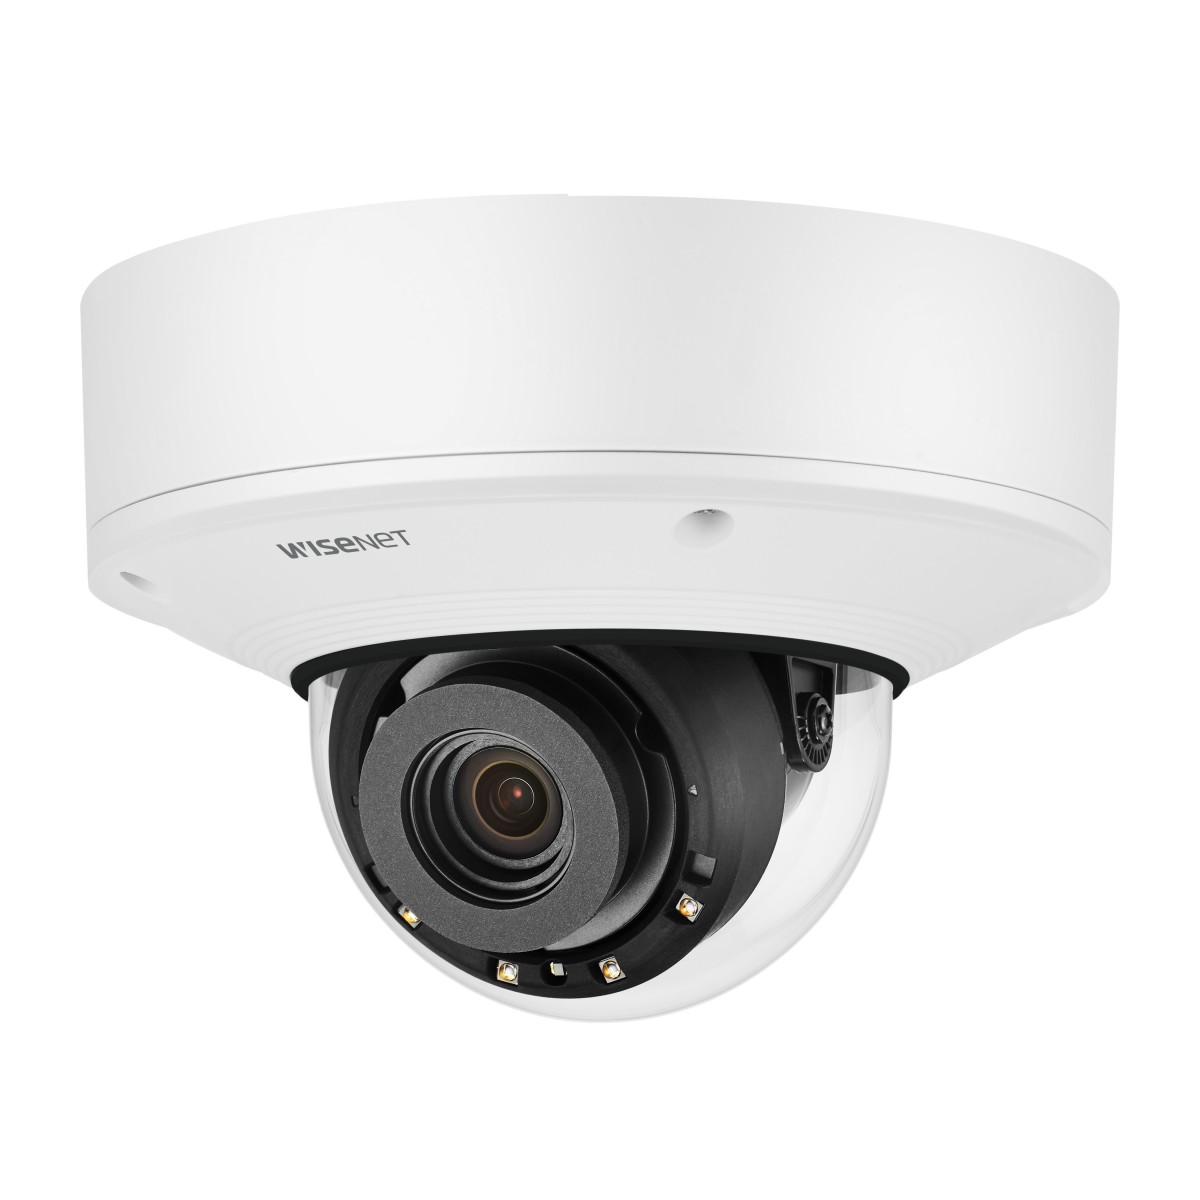 Hanwha Techwin Hanwha PNV-A9081R - IP security camera - Outdoor - Wired - Dome - Ceiling - White